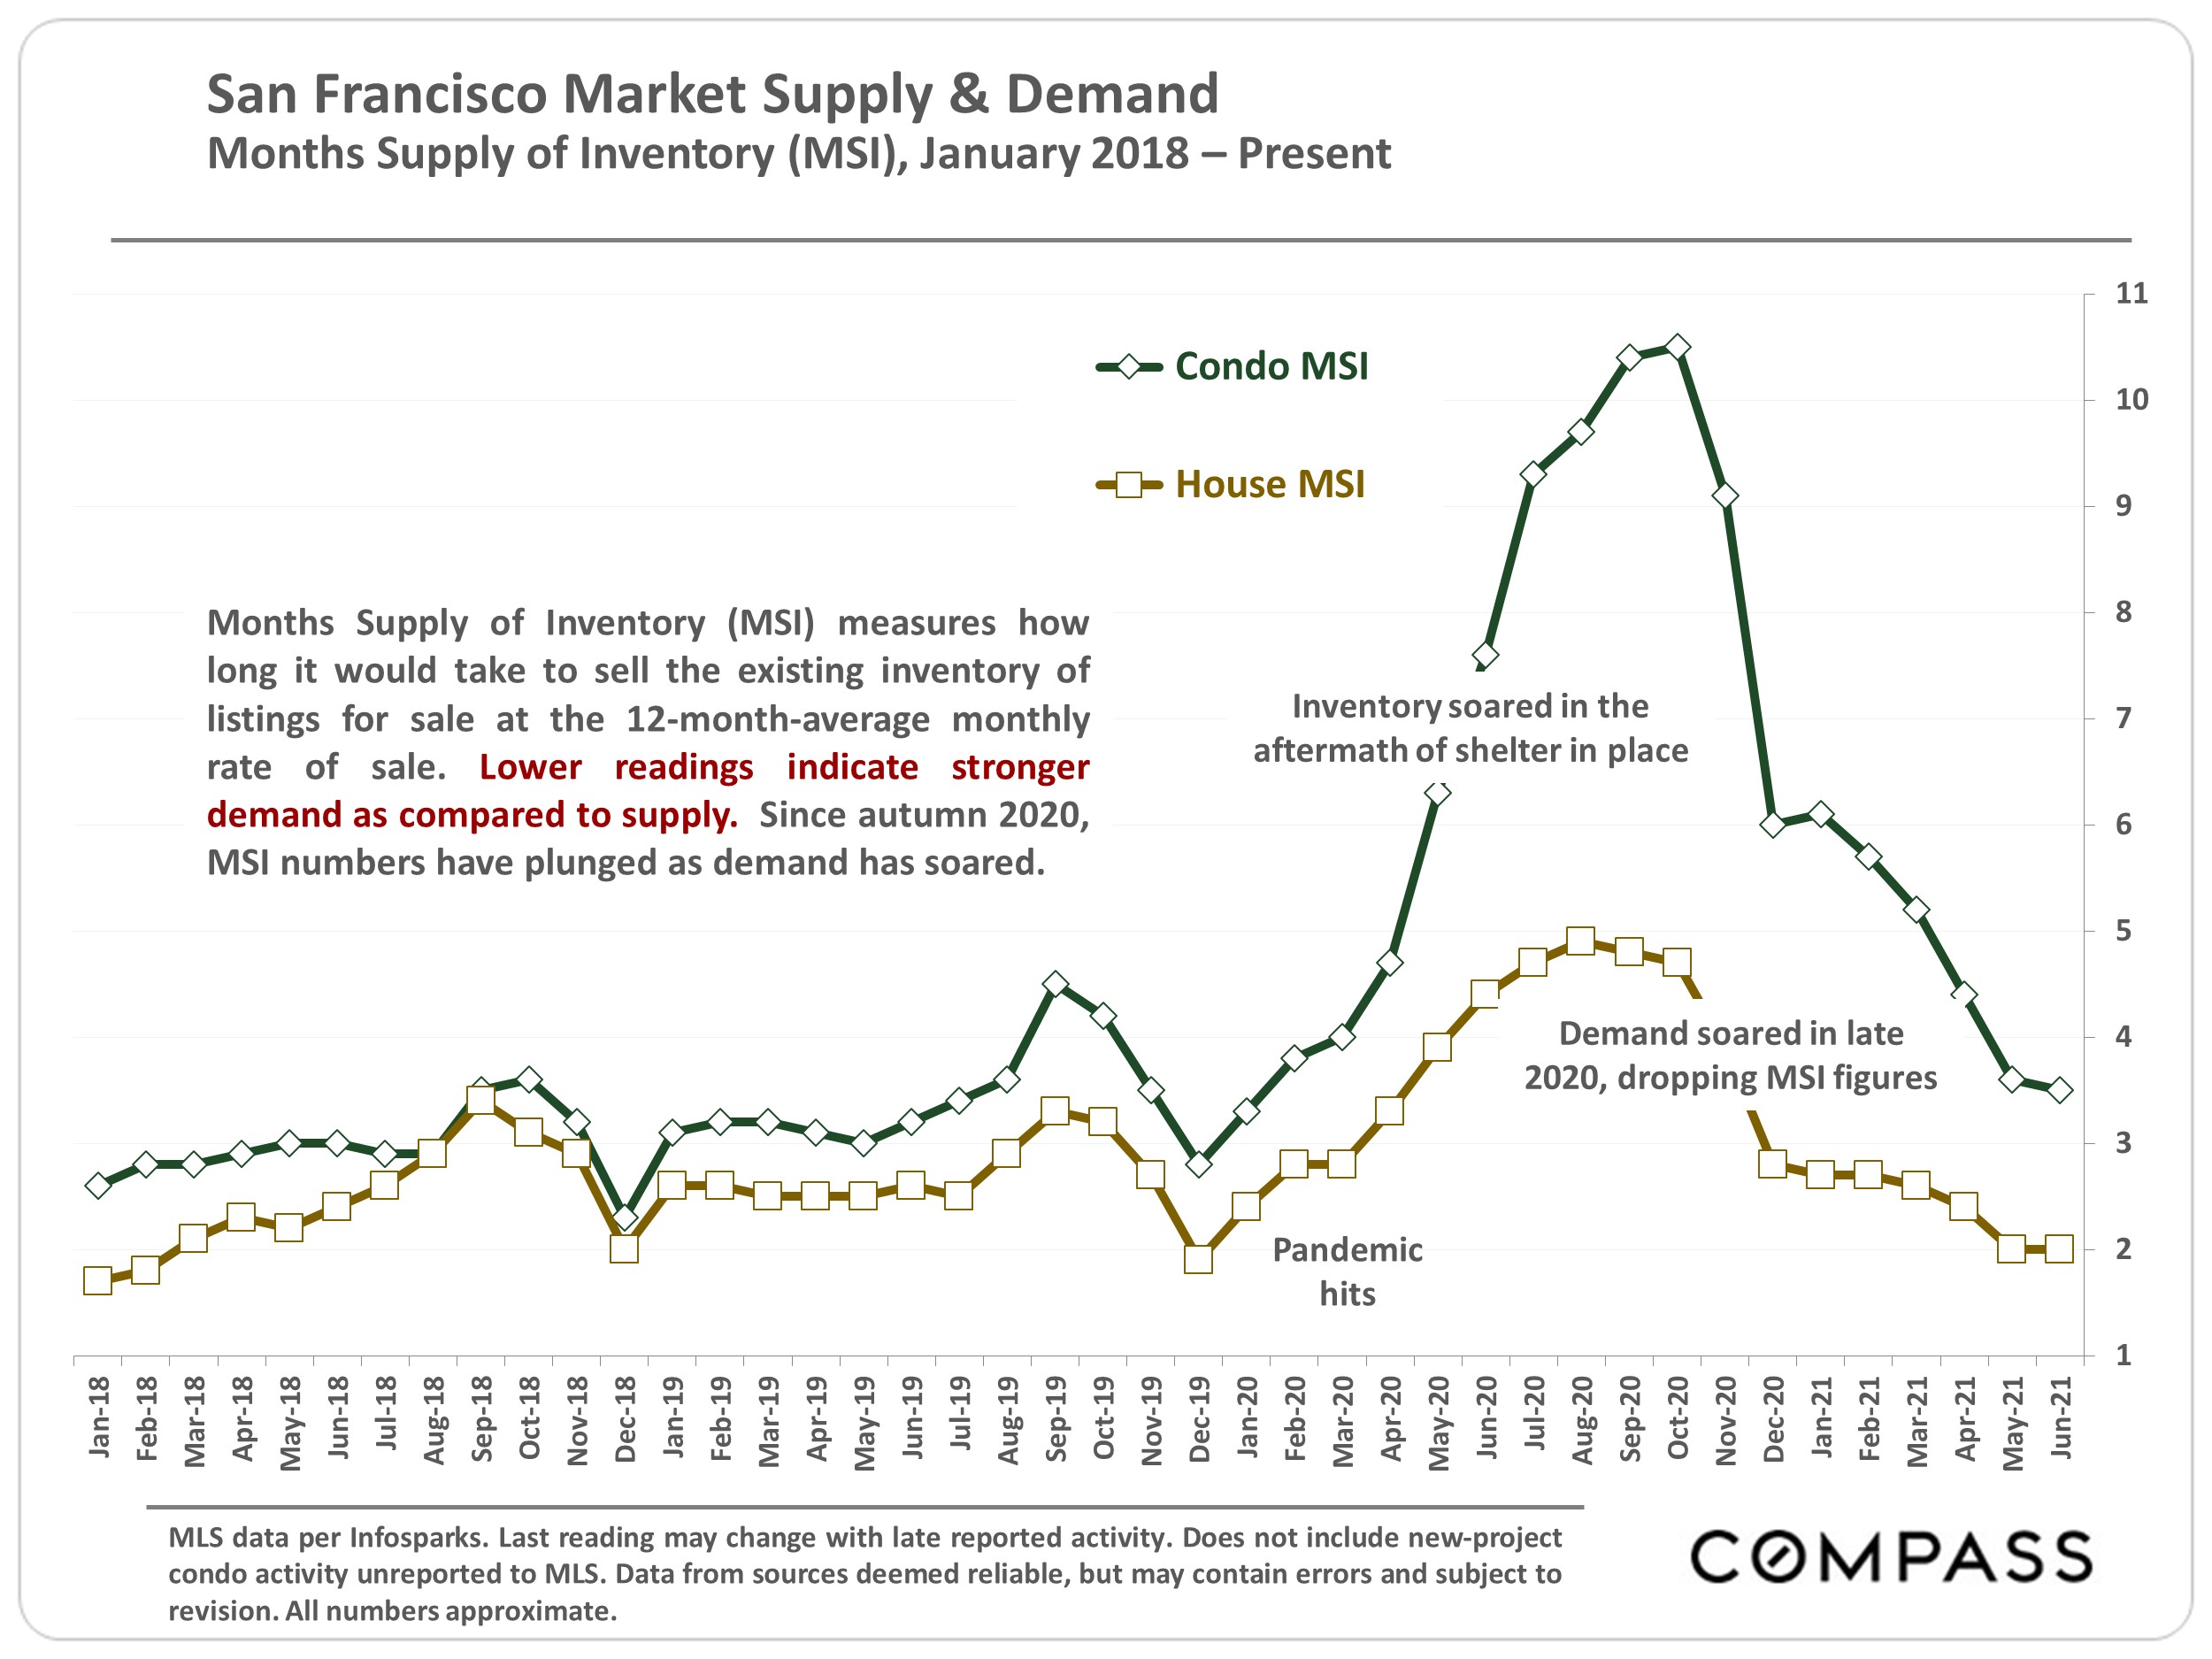 Graph showing the months supply of inventory (MSI) for House and Condo, from Jan 2018 to Jun 2021, San Francisco Market Supply and Demand